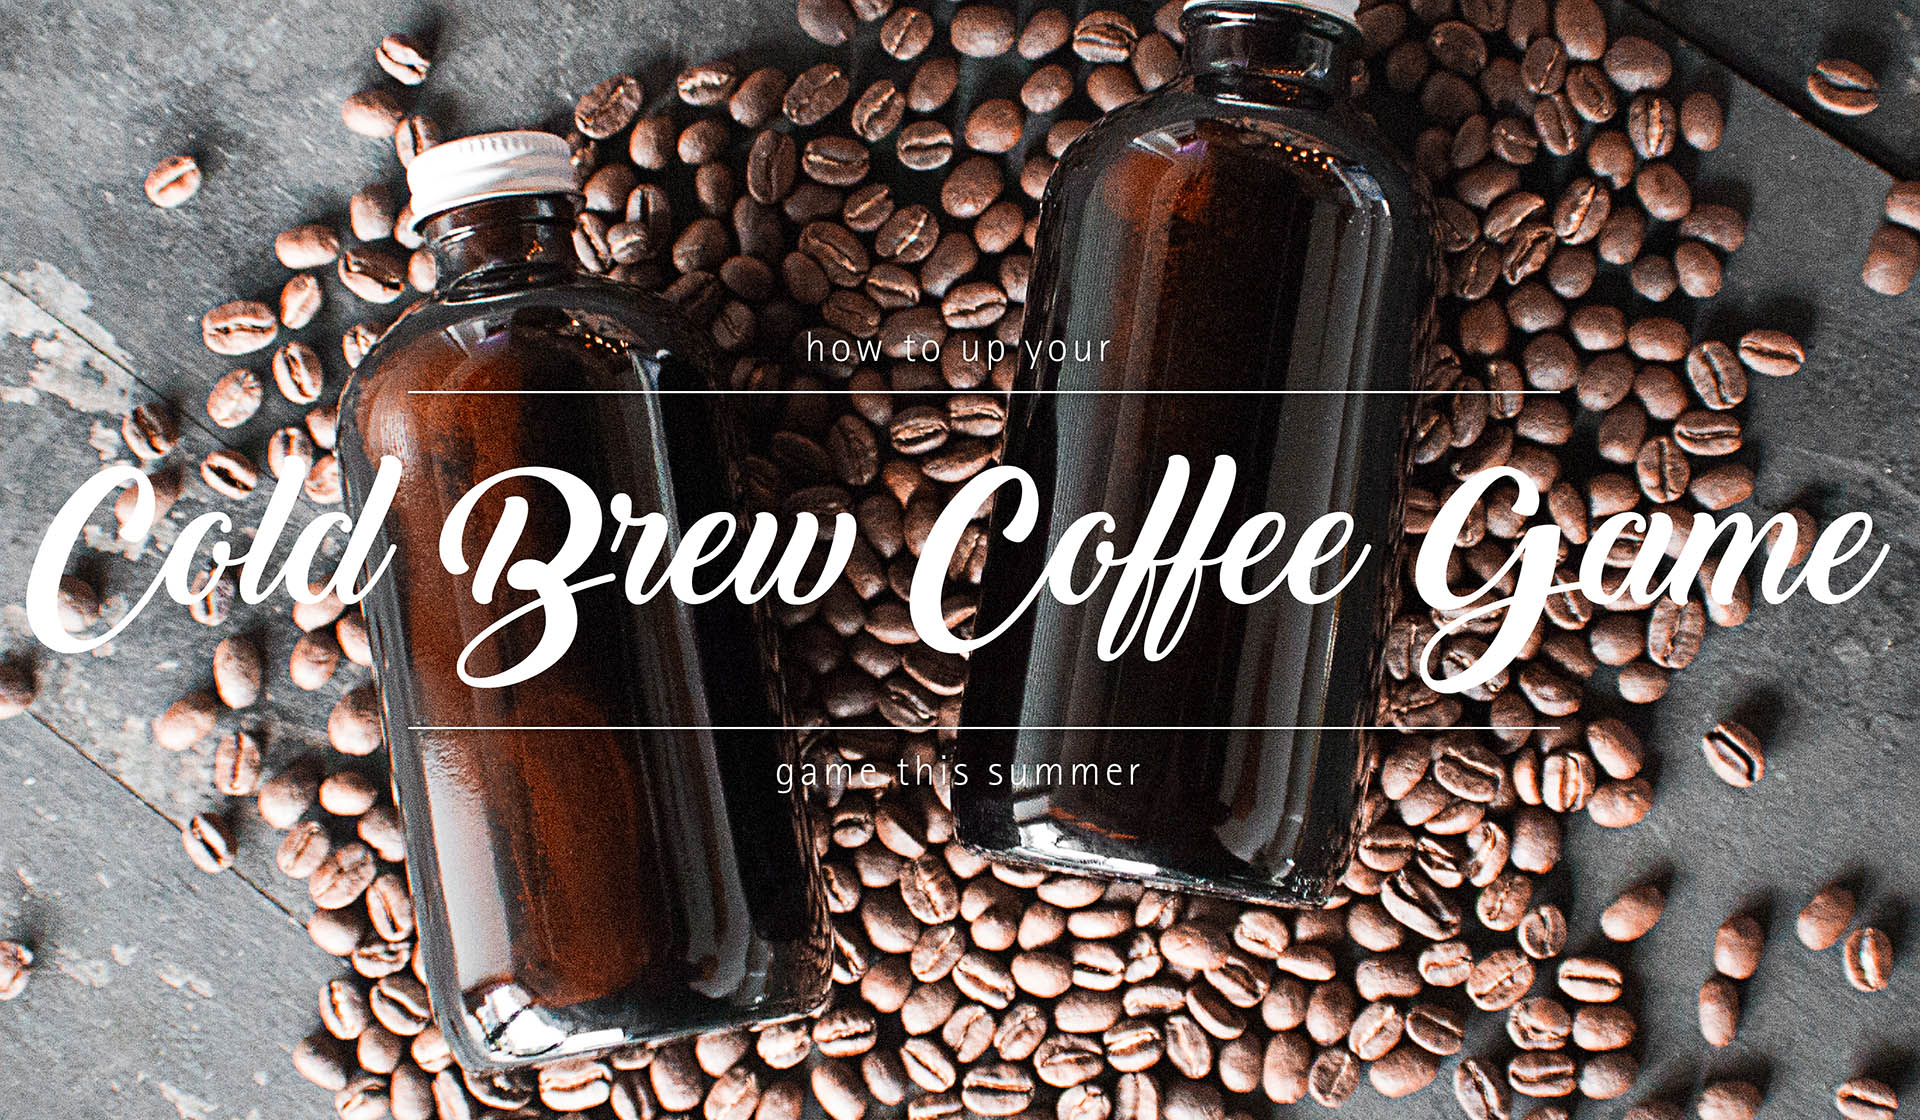 How to Up Your Cold Brew Coffee Game This Summer